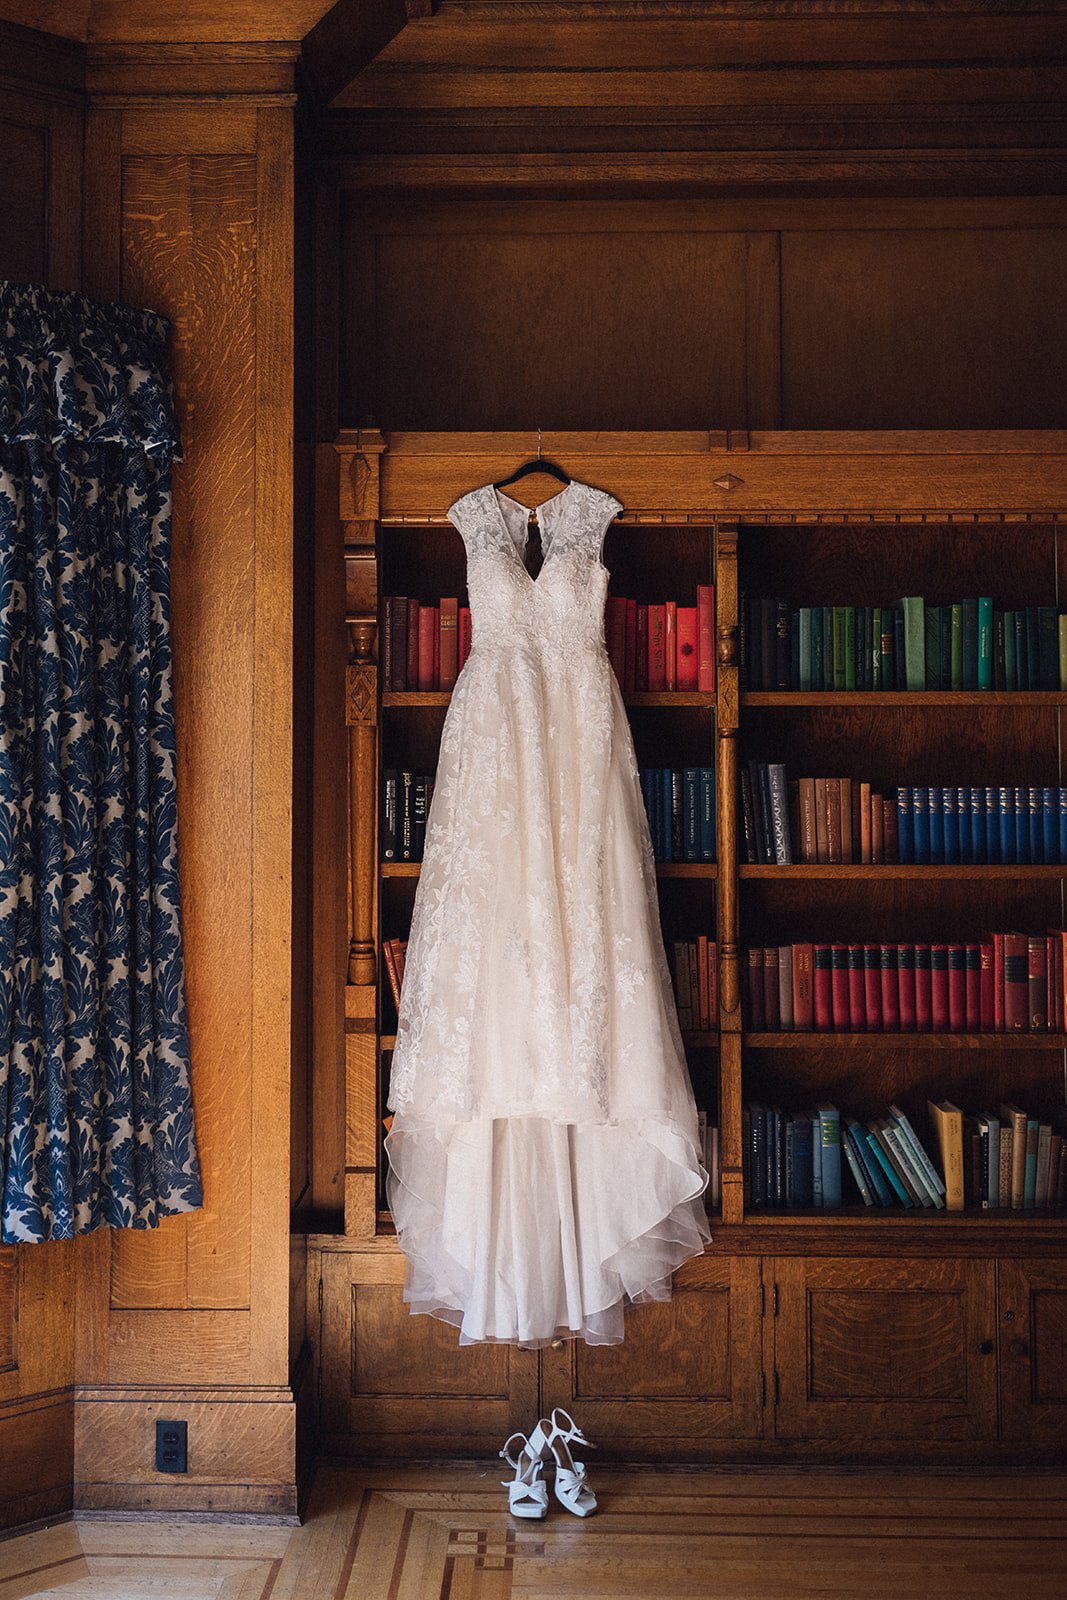 Lace wedding dress hanging from antique wooden bookshelf at Cecil Green Park House in Vancouver, BC.